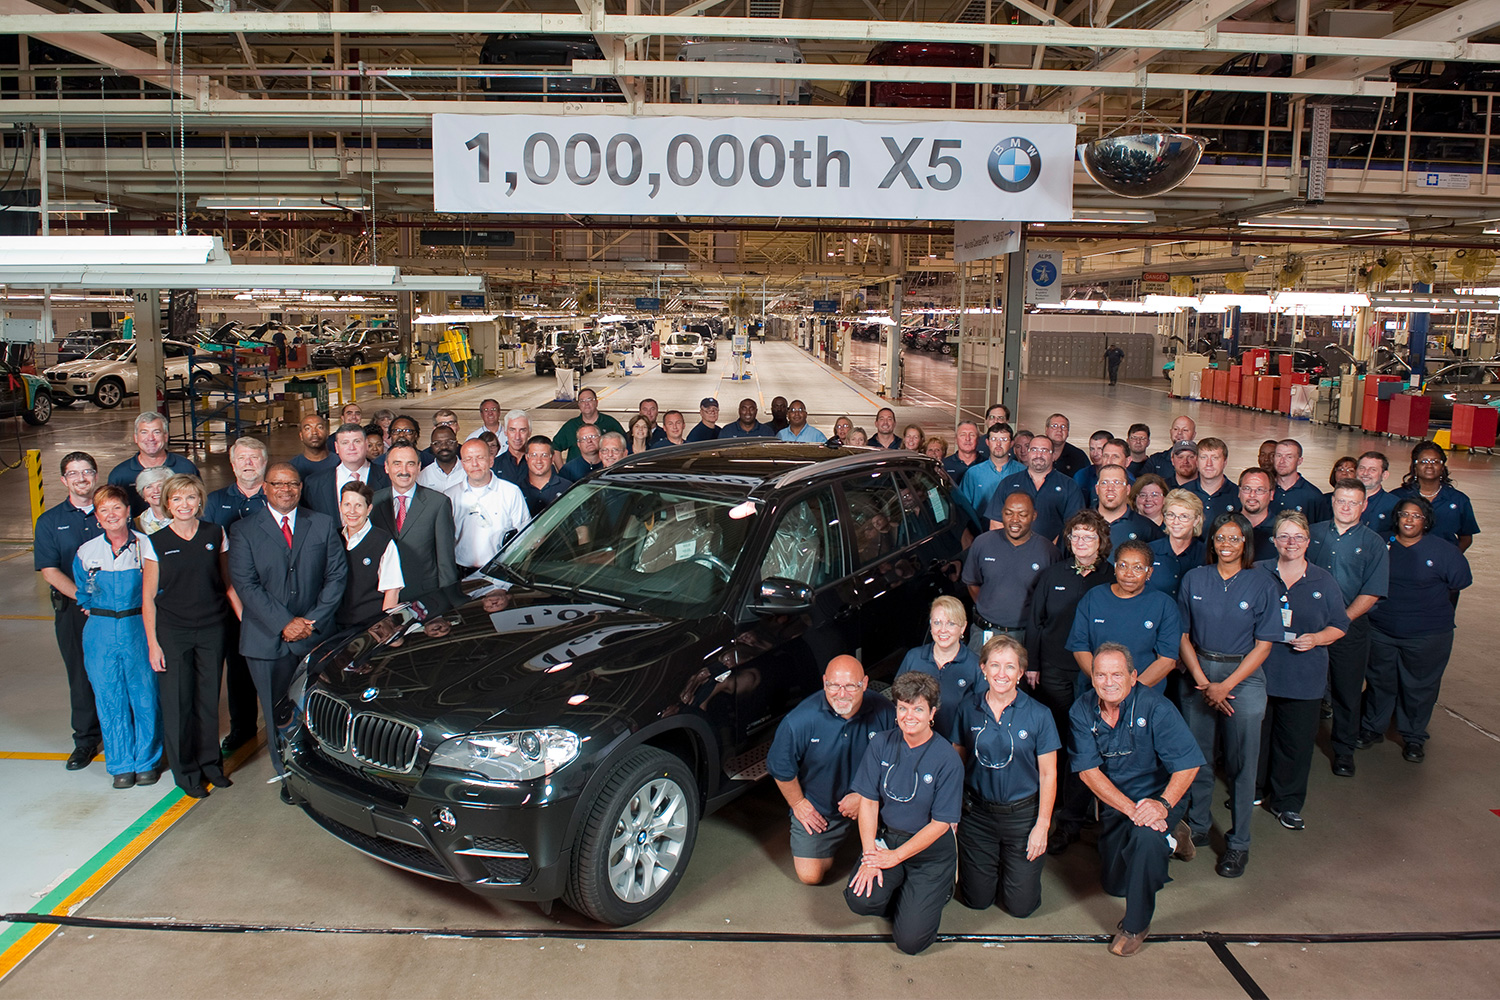 The 1 millionth BMW X5, pictured at BMW's South Carolina Spartanburg factory on June 8, 2010